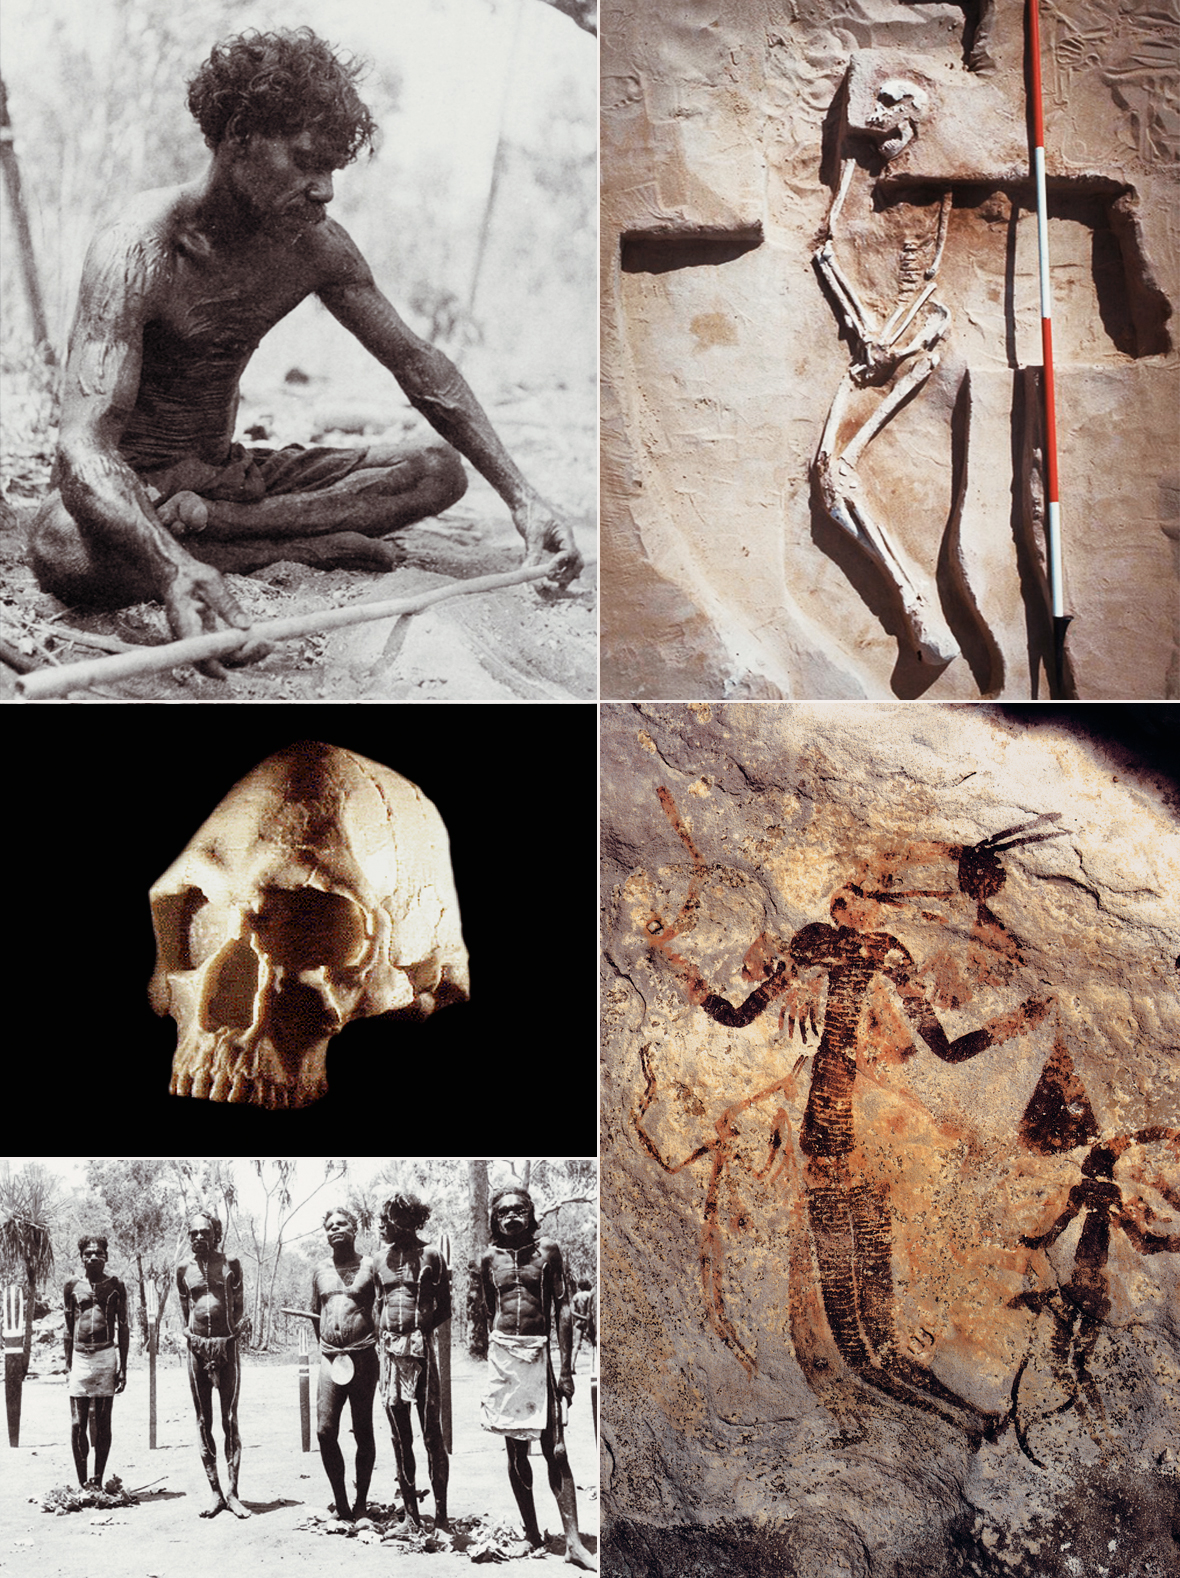 
Research into the first inhabitants of Australia